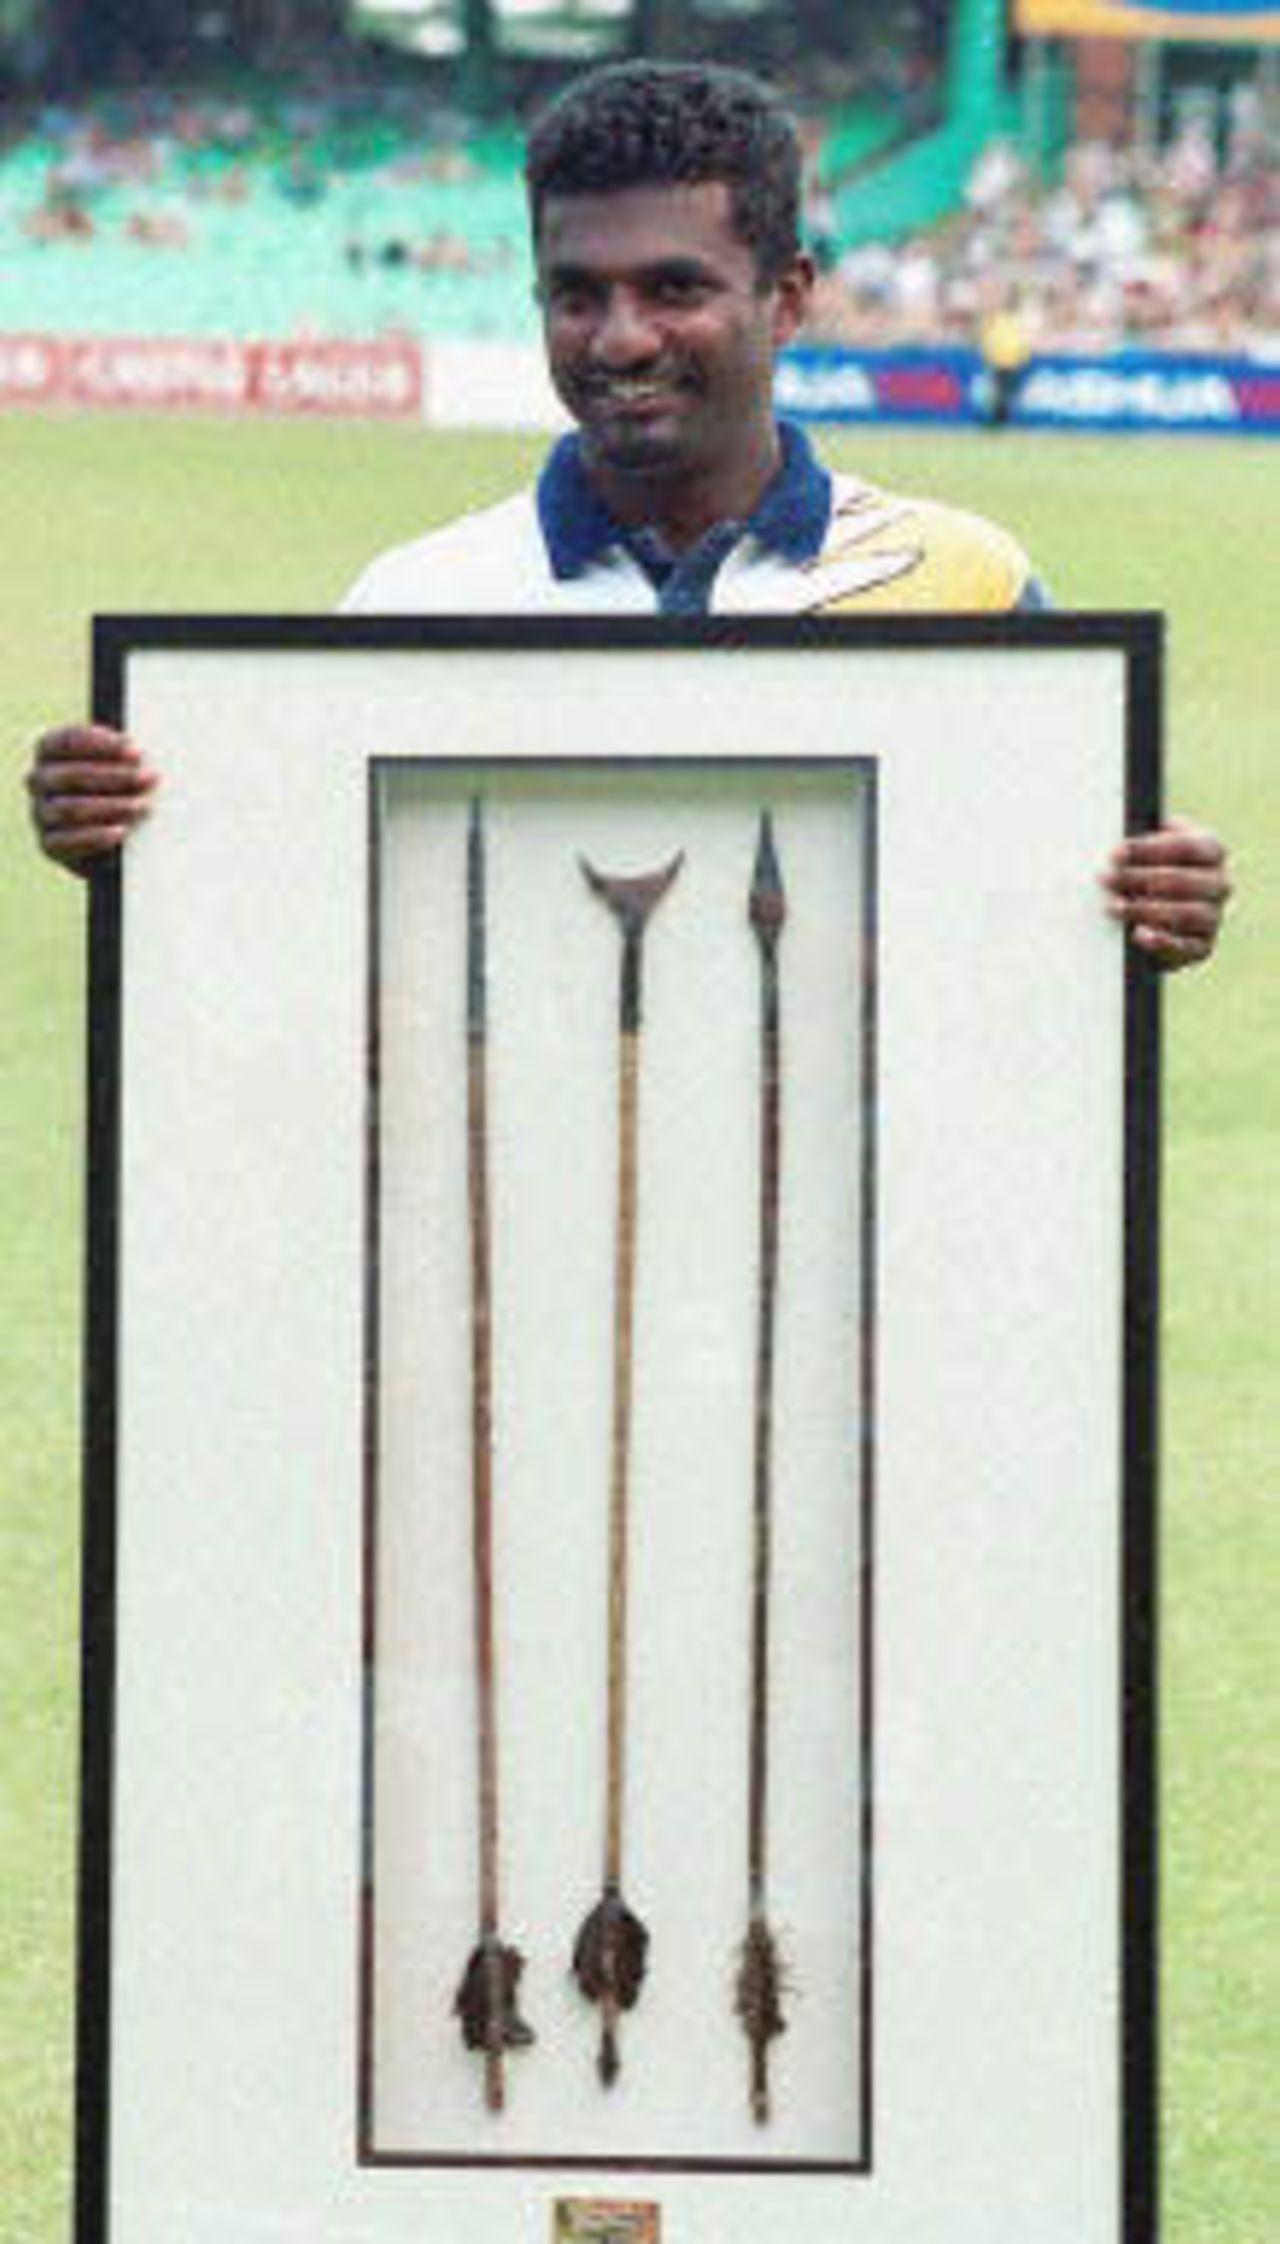 Sri Lankan off spinner Muttiah Muralitharan receives a special commemorative award for his 300th wicket in international Test matches at Durban's Kingsmead stadium 30 December 2000. The match between South Africa and Sri Lanka ended in a draw.